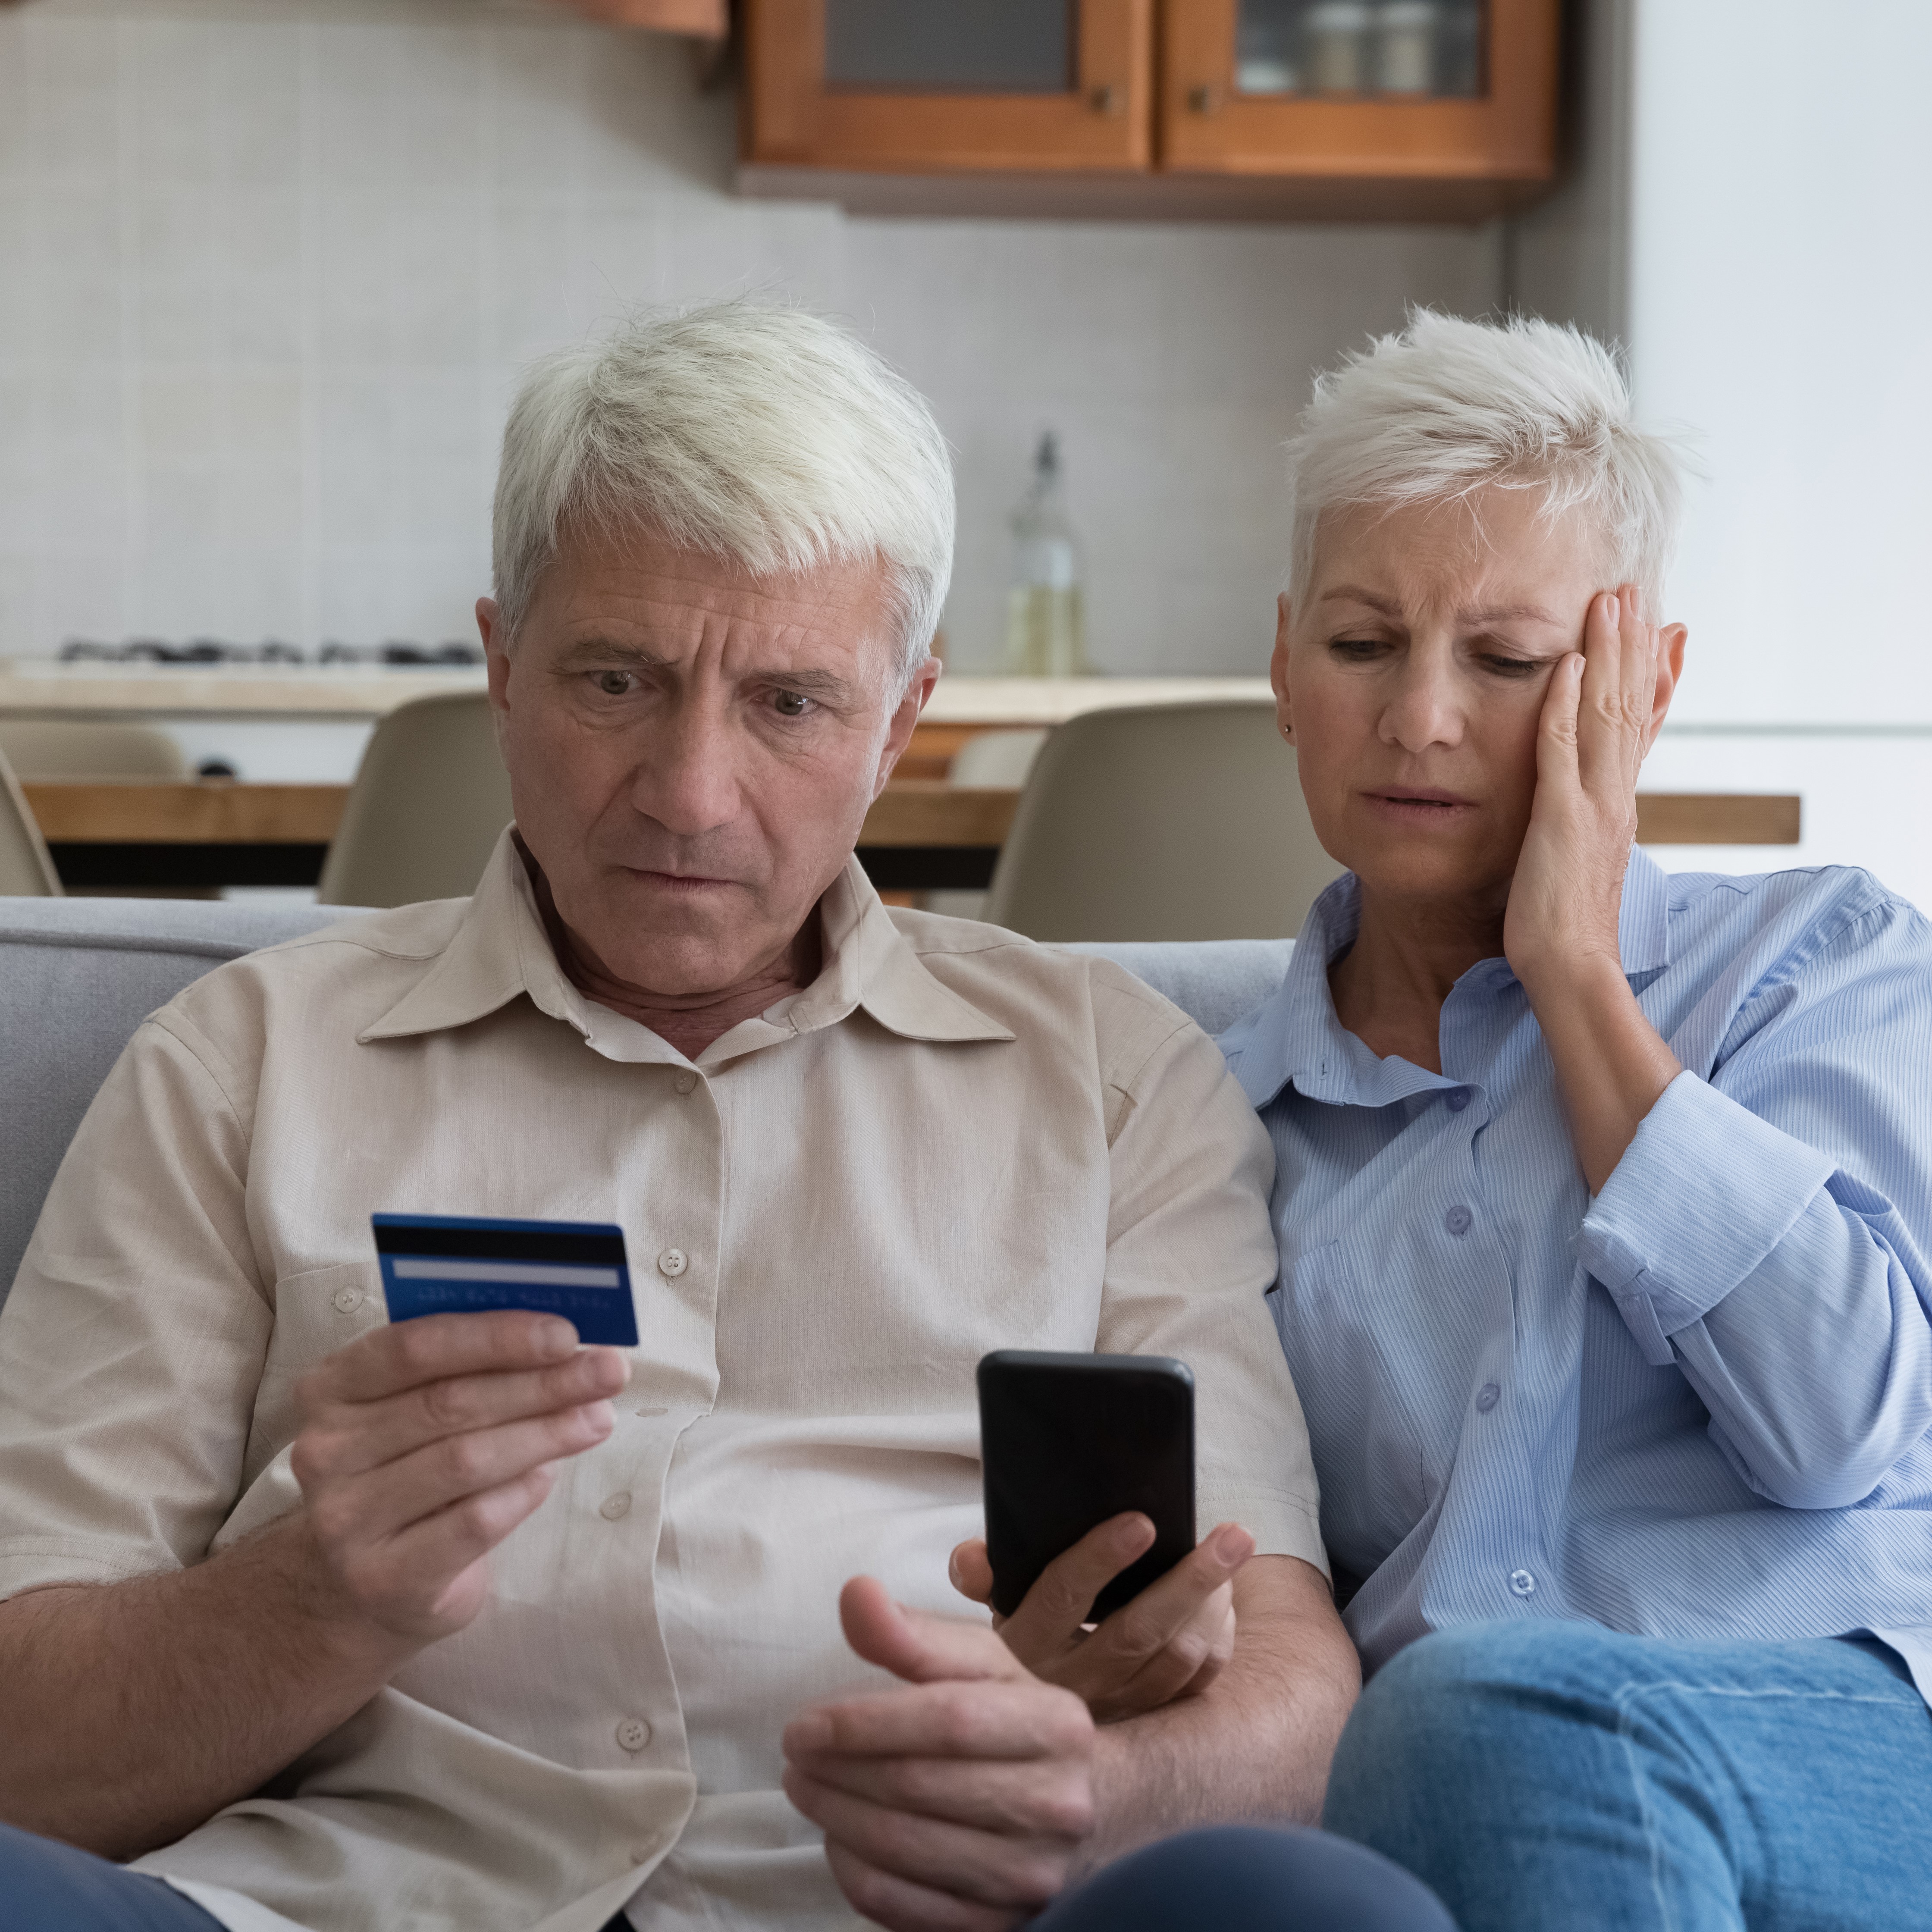 Senior couple looking upset holding credit card and cellphone